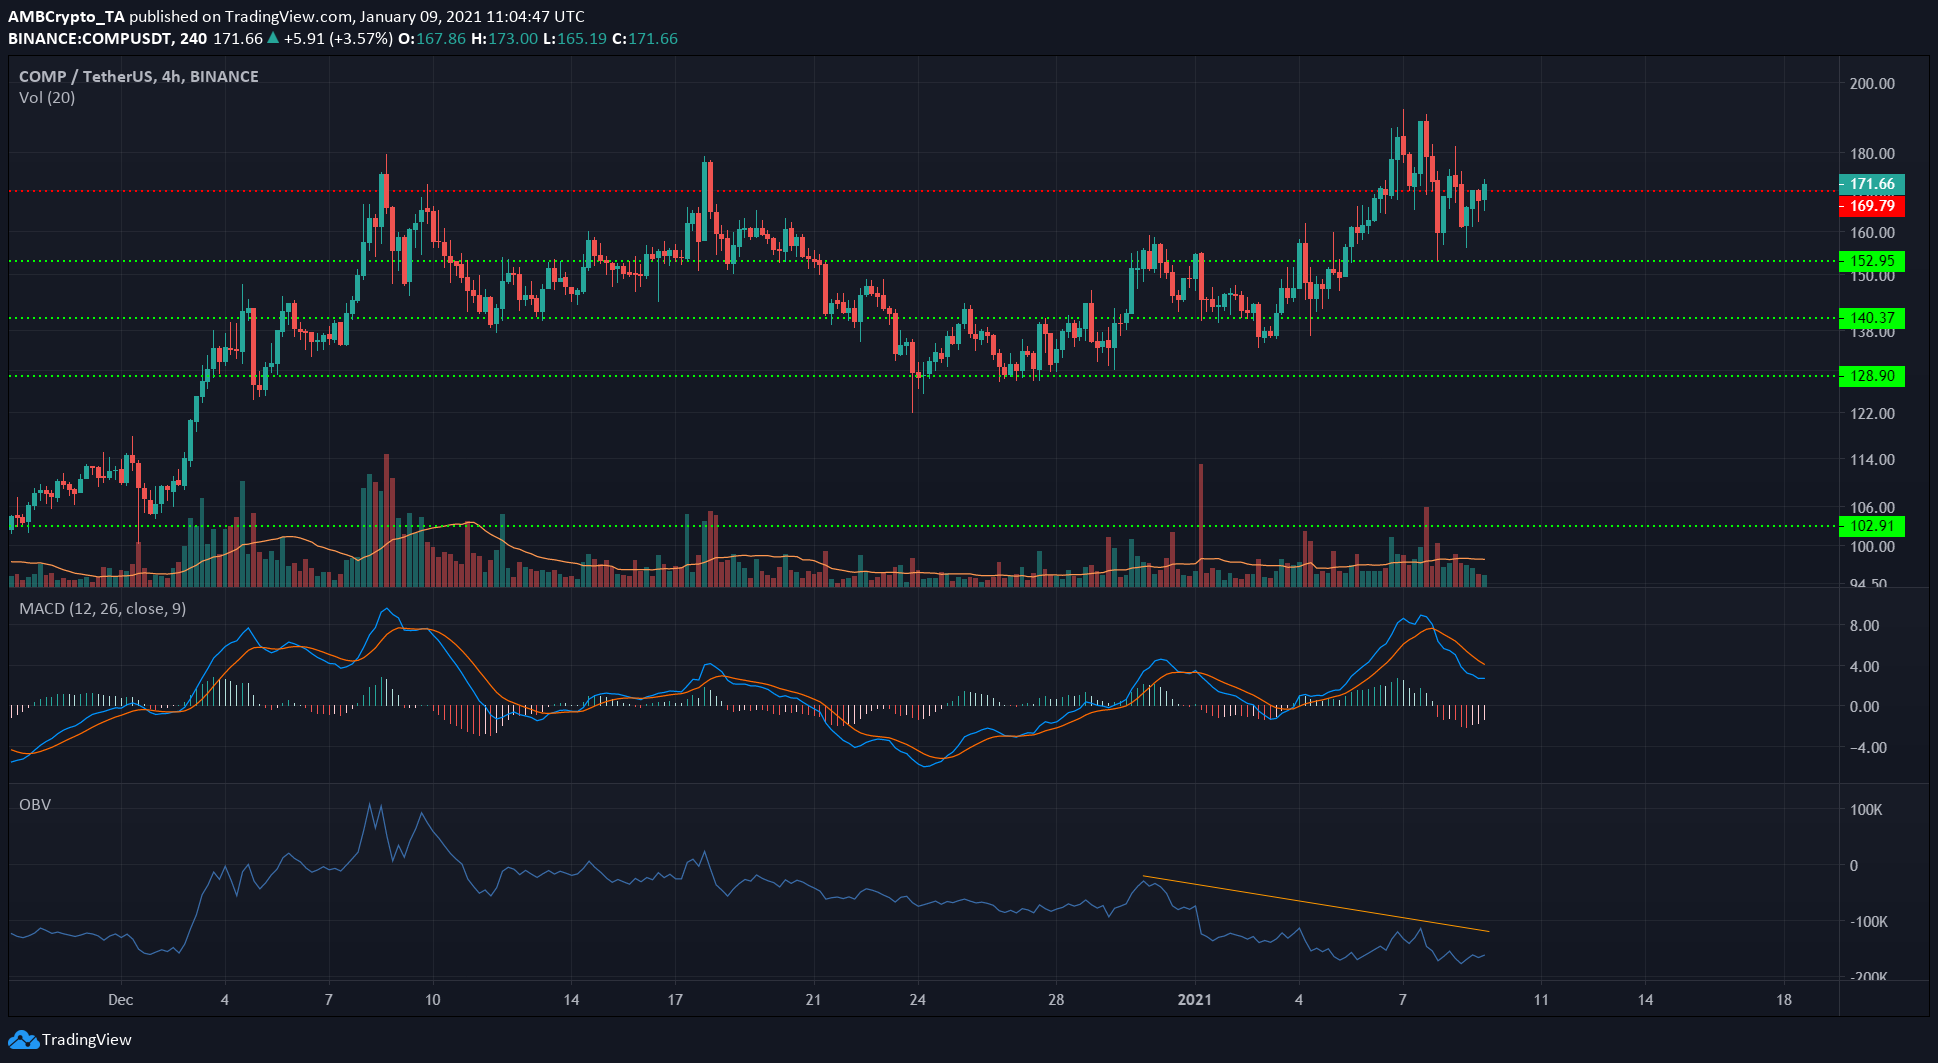 Chainlink, Ethereum Classic, Compound Price Analysis: 09 January